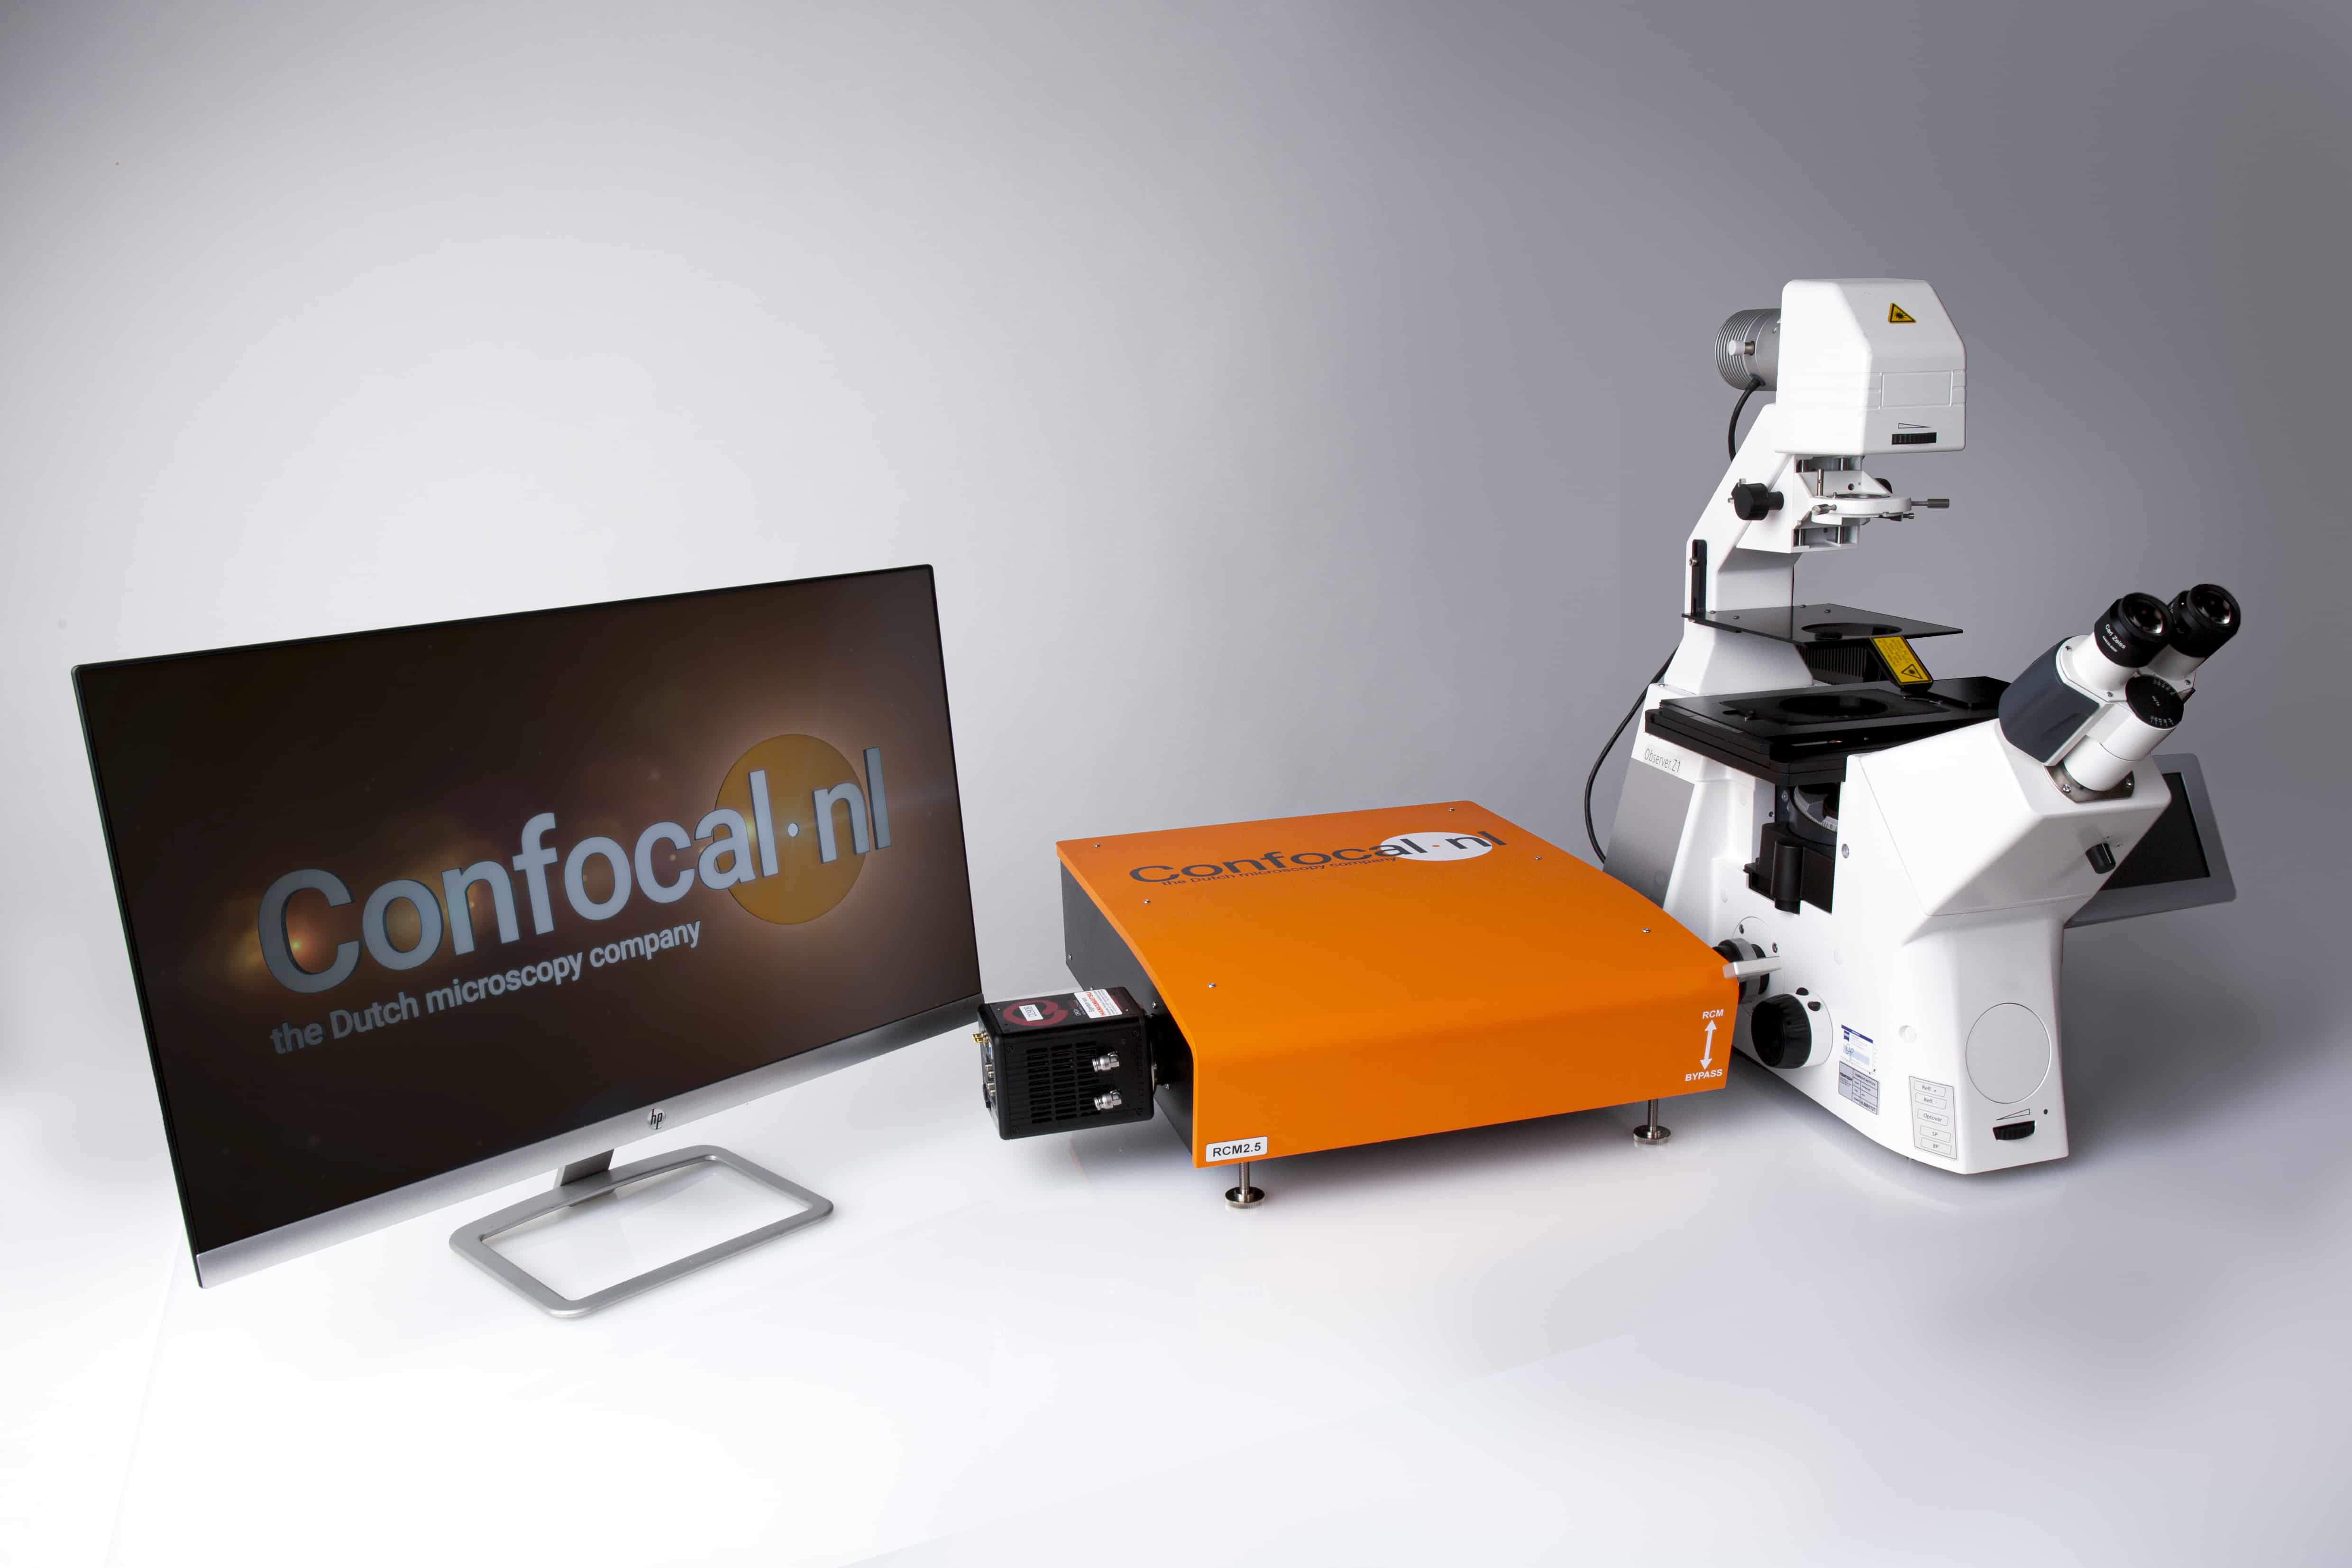 Confocal microscope system